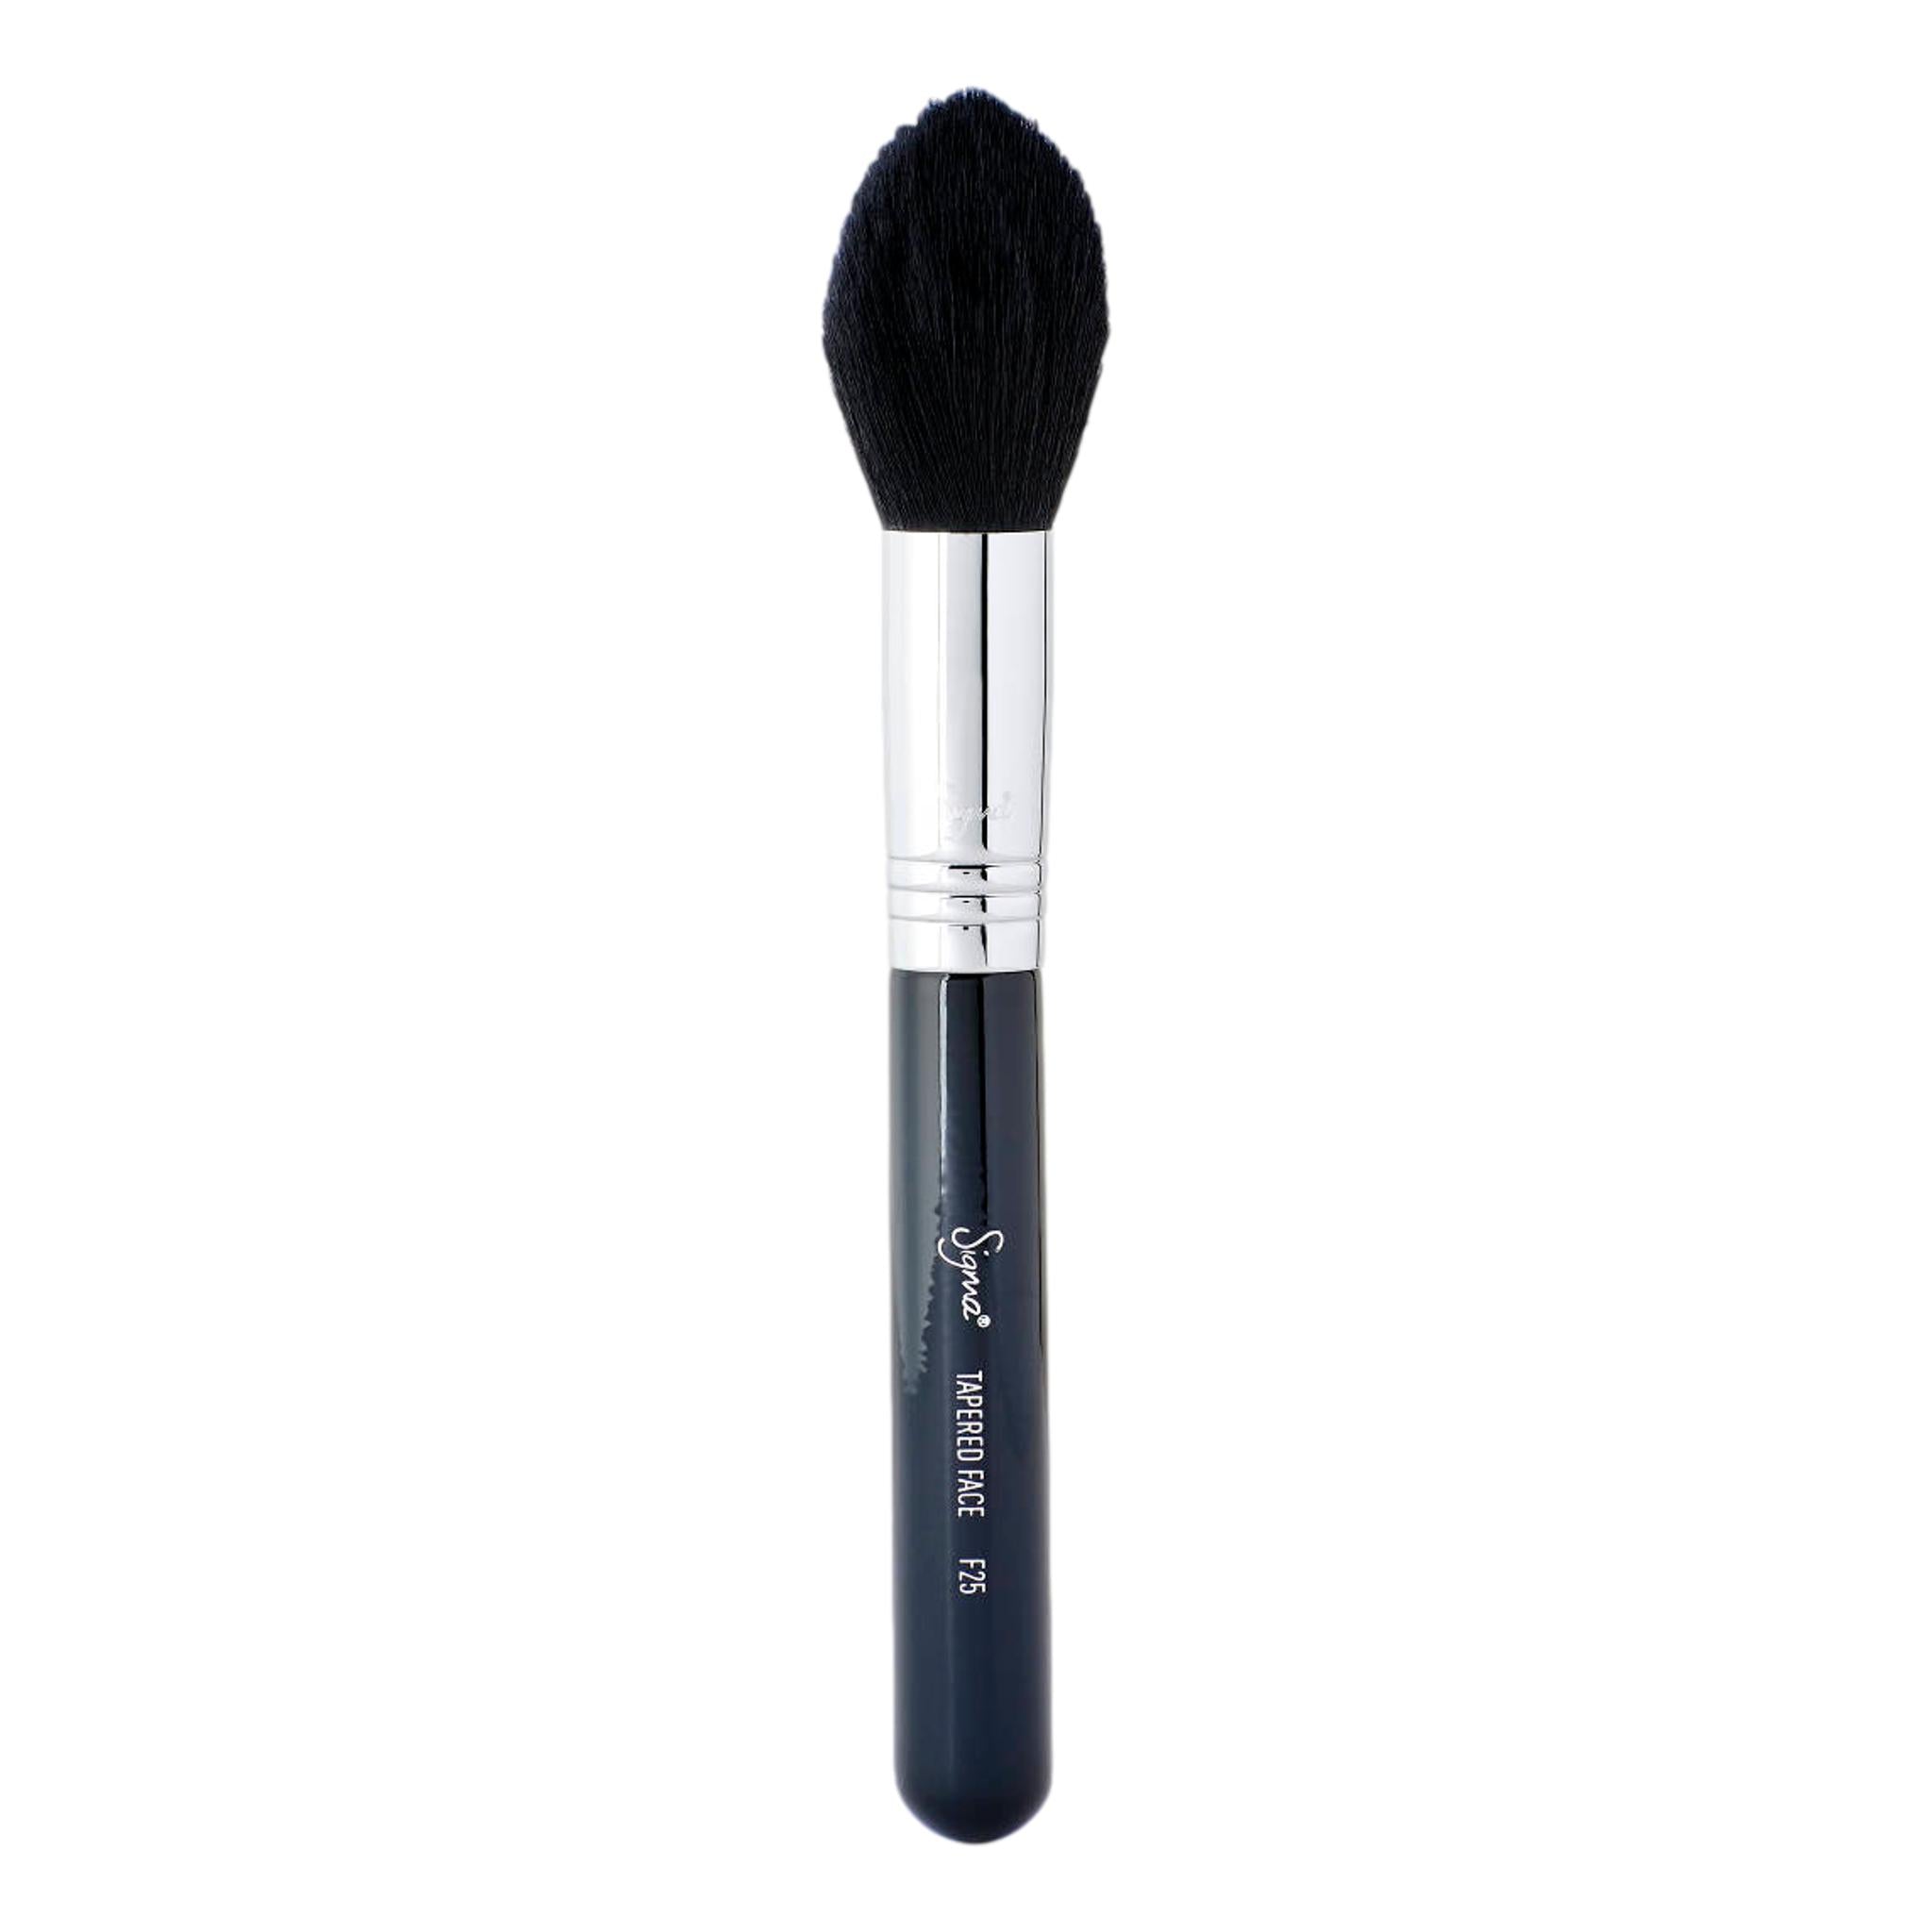 SIGMA F25 Tapered Face Brush